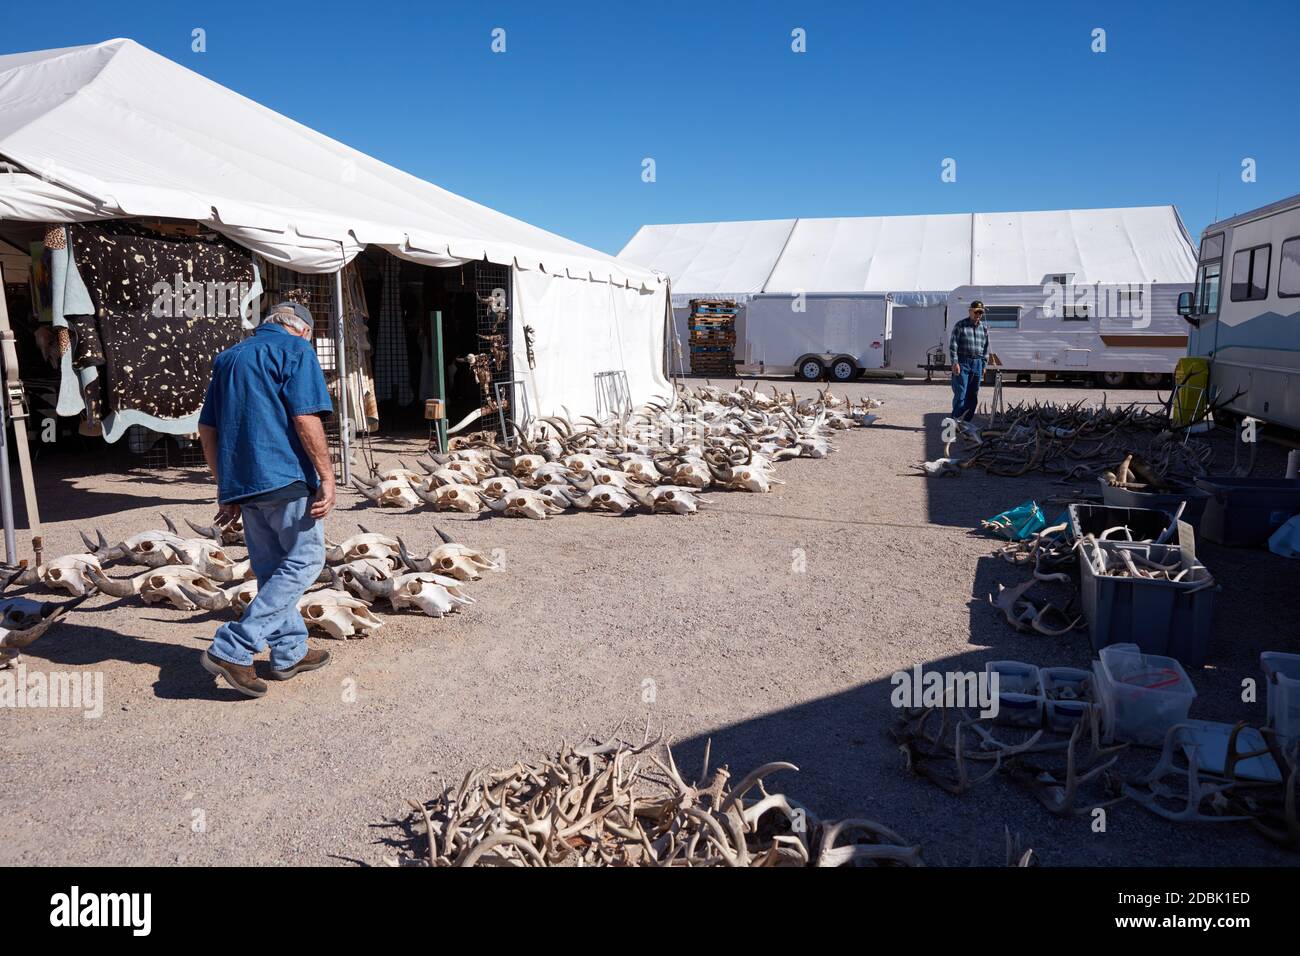 Cattle skulls available for sale at a market in Quartzite, Arizona Stock Photo